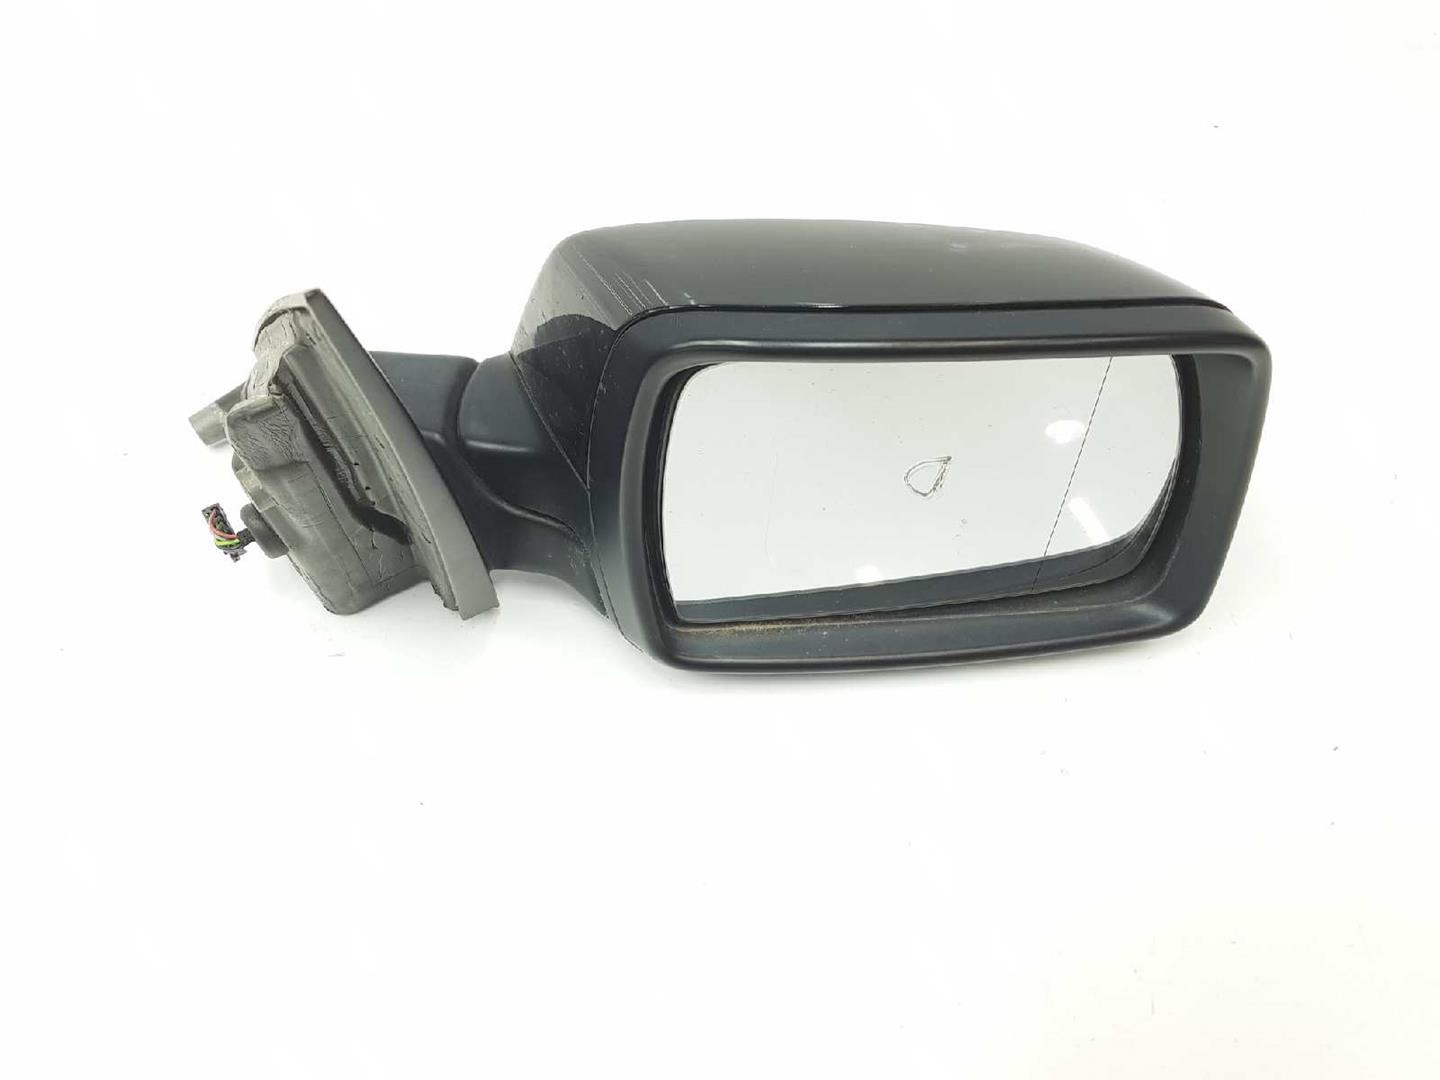 BMW X3 E83 (2003-2010) Right Side Wing Mirror 51163448132, 51163448132, 5PINES 19653289